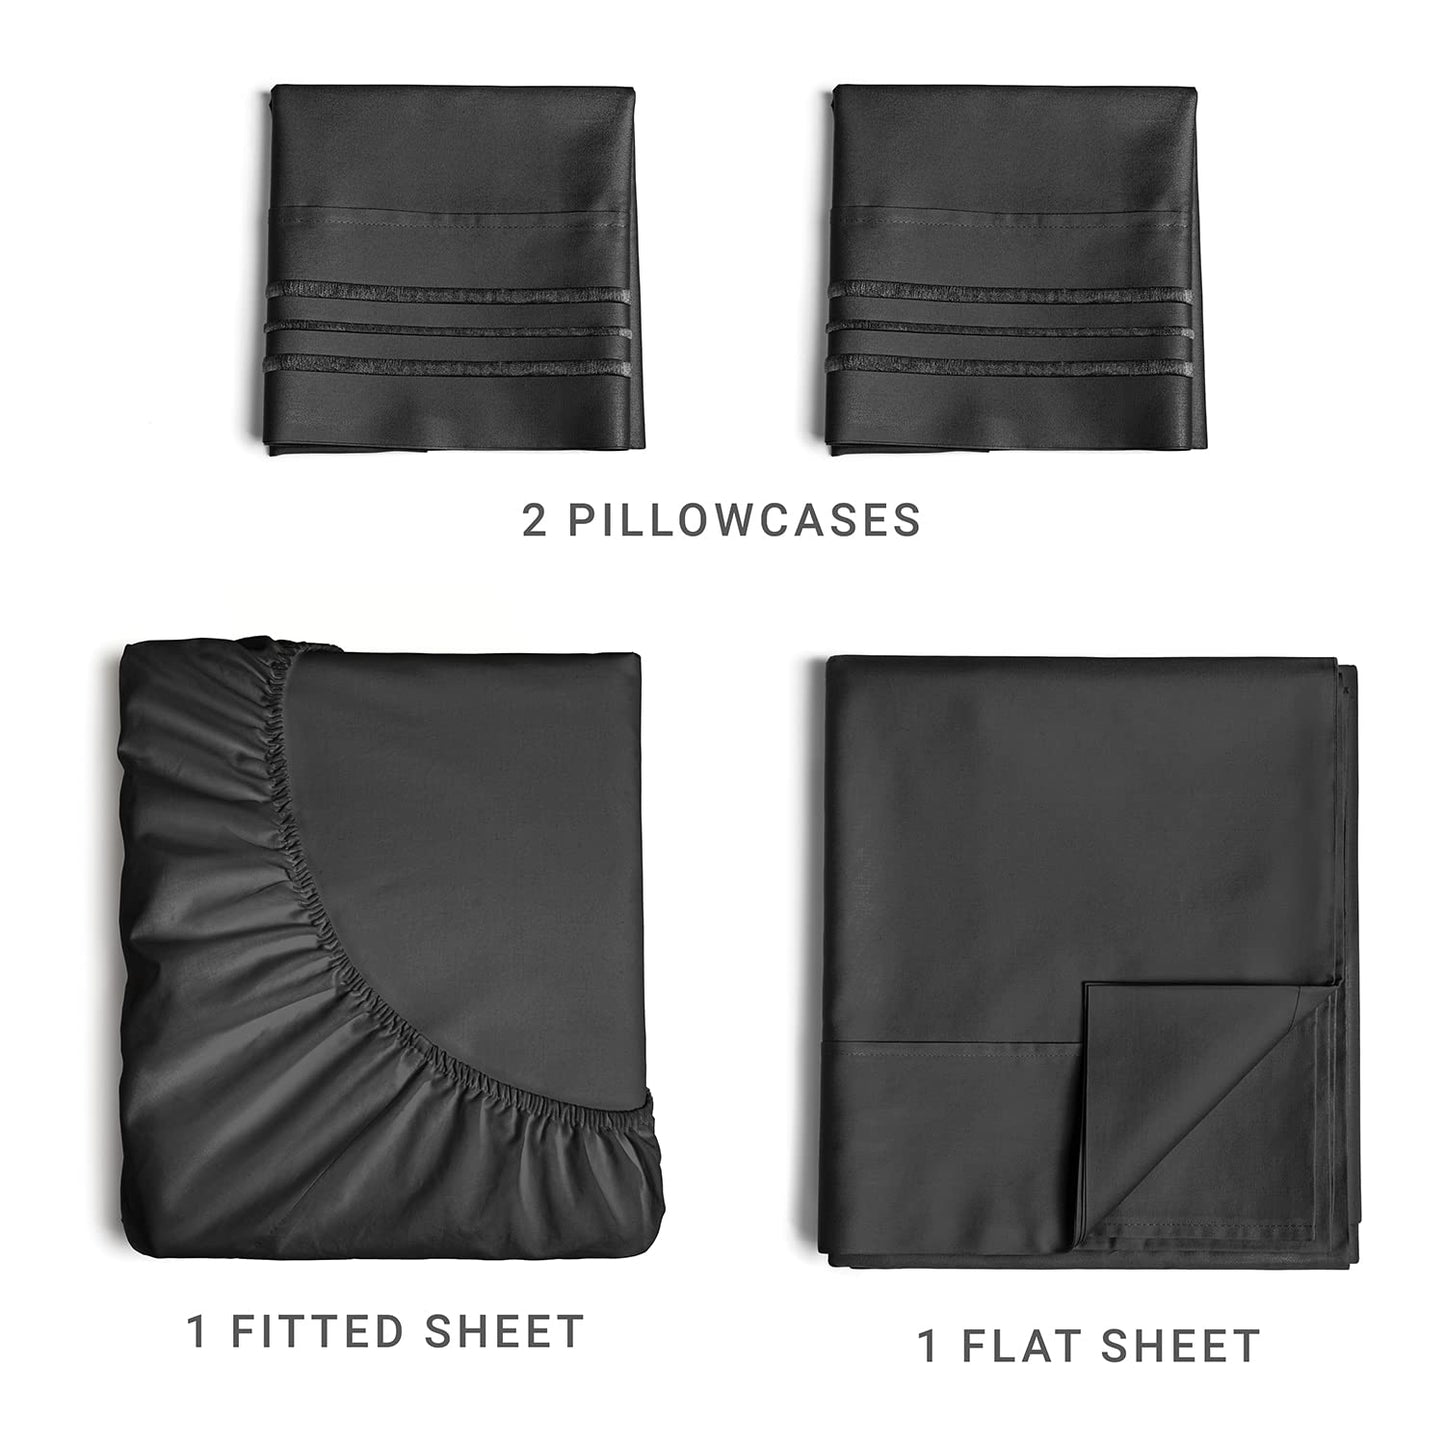 King Size 4 Piece Sheet Set - Comfy Breathable & Cooling Sheets - Hotel Luxury Bed Sheets for Women & Men - Deep Pockets, Easy-Fit, Extra Soft & Wrinkle Free Sheets - Black Oeko-Tex Bed Sheet Set